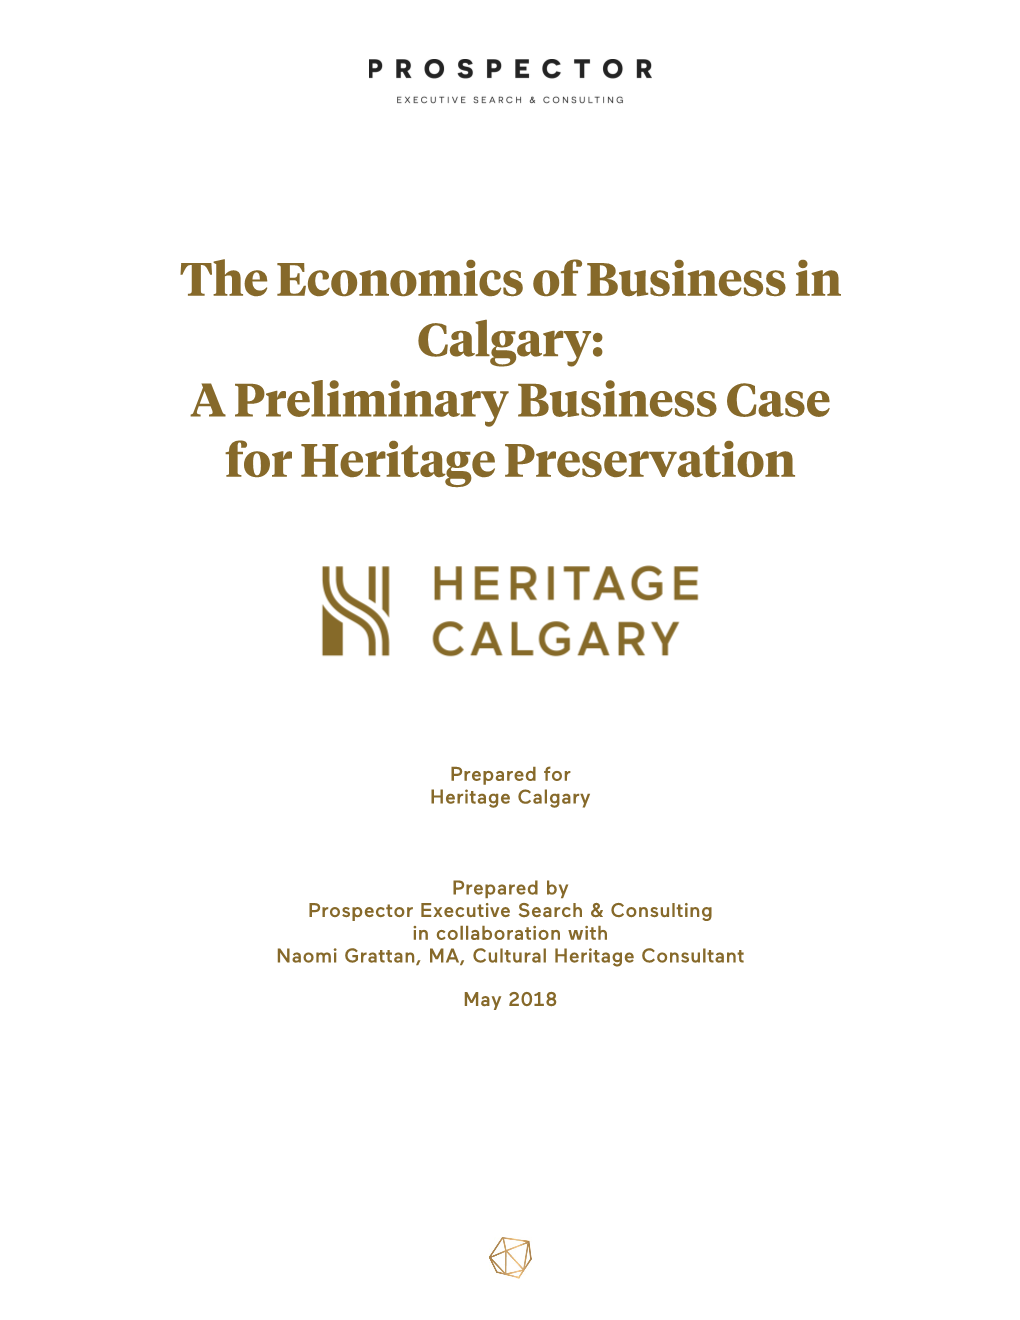 The Economics of Business in Calgary: a Preliminary Business Case for Heritage Preservation